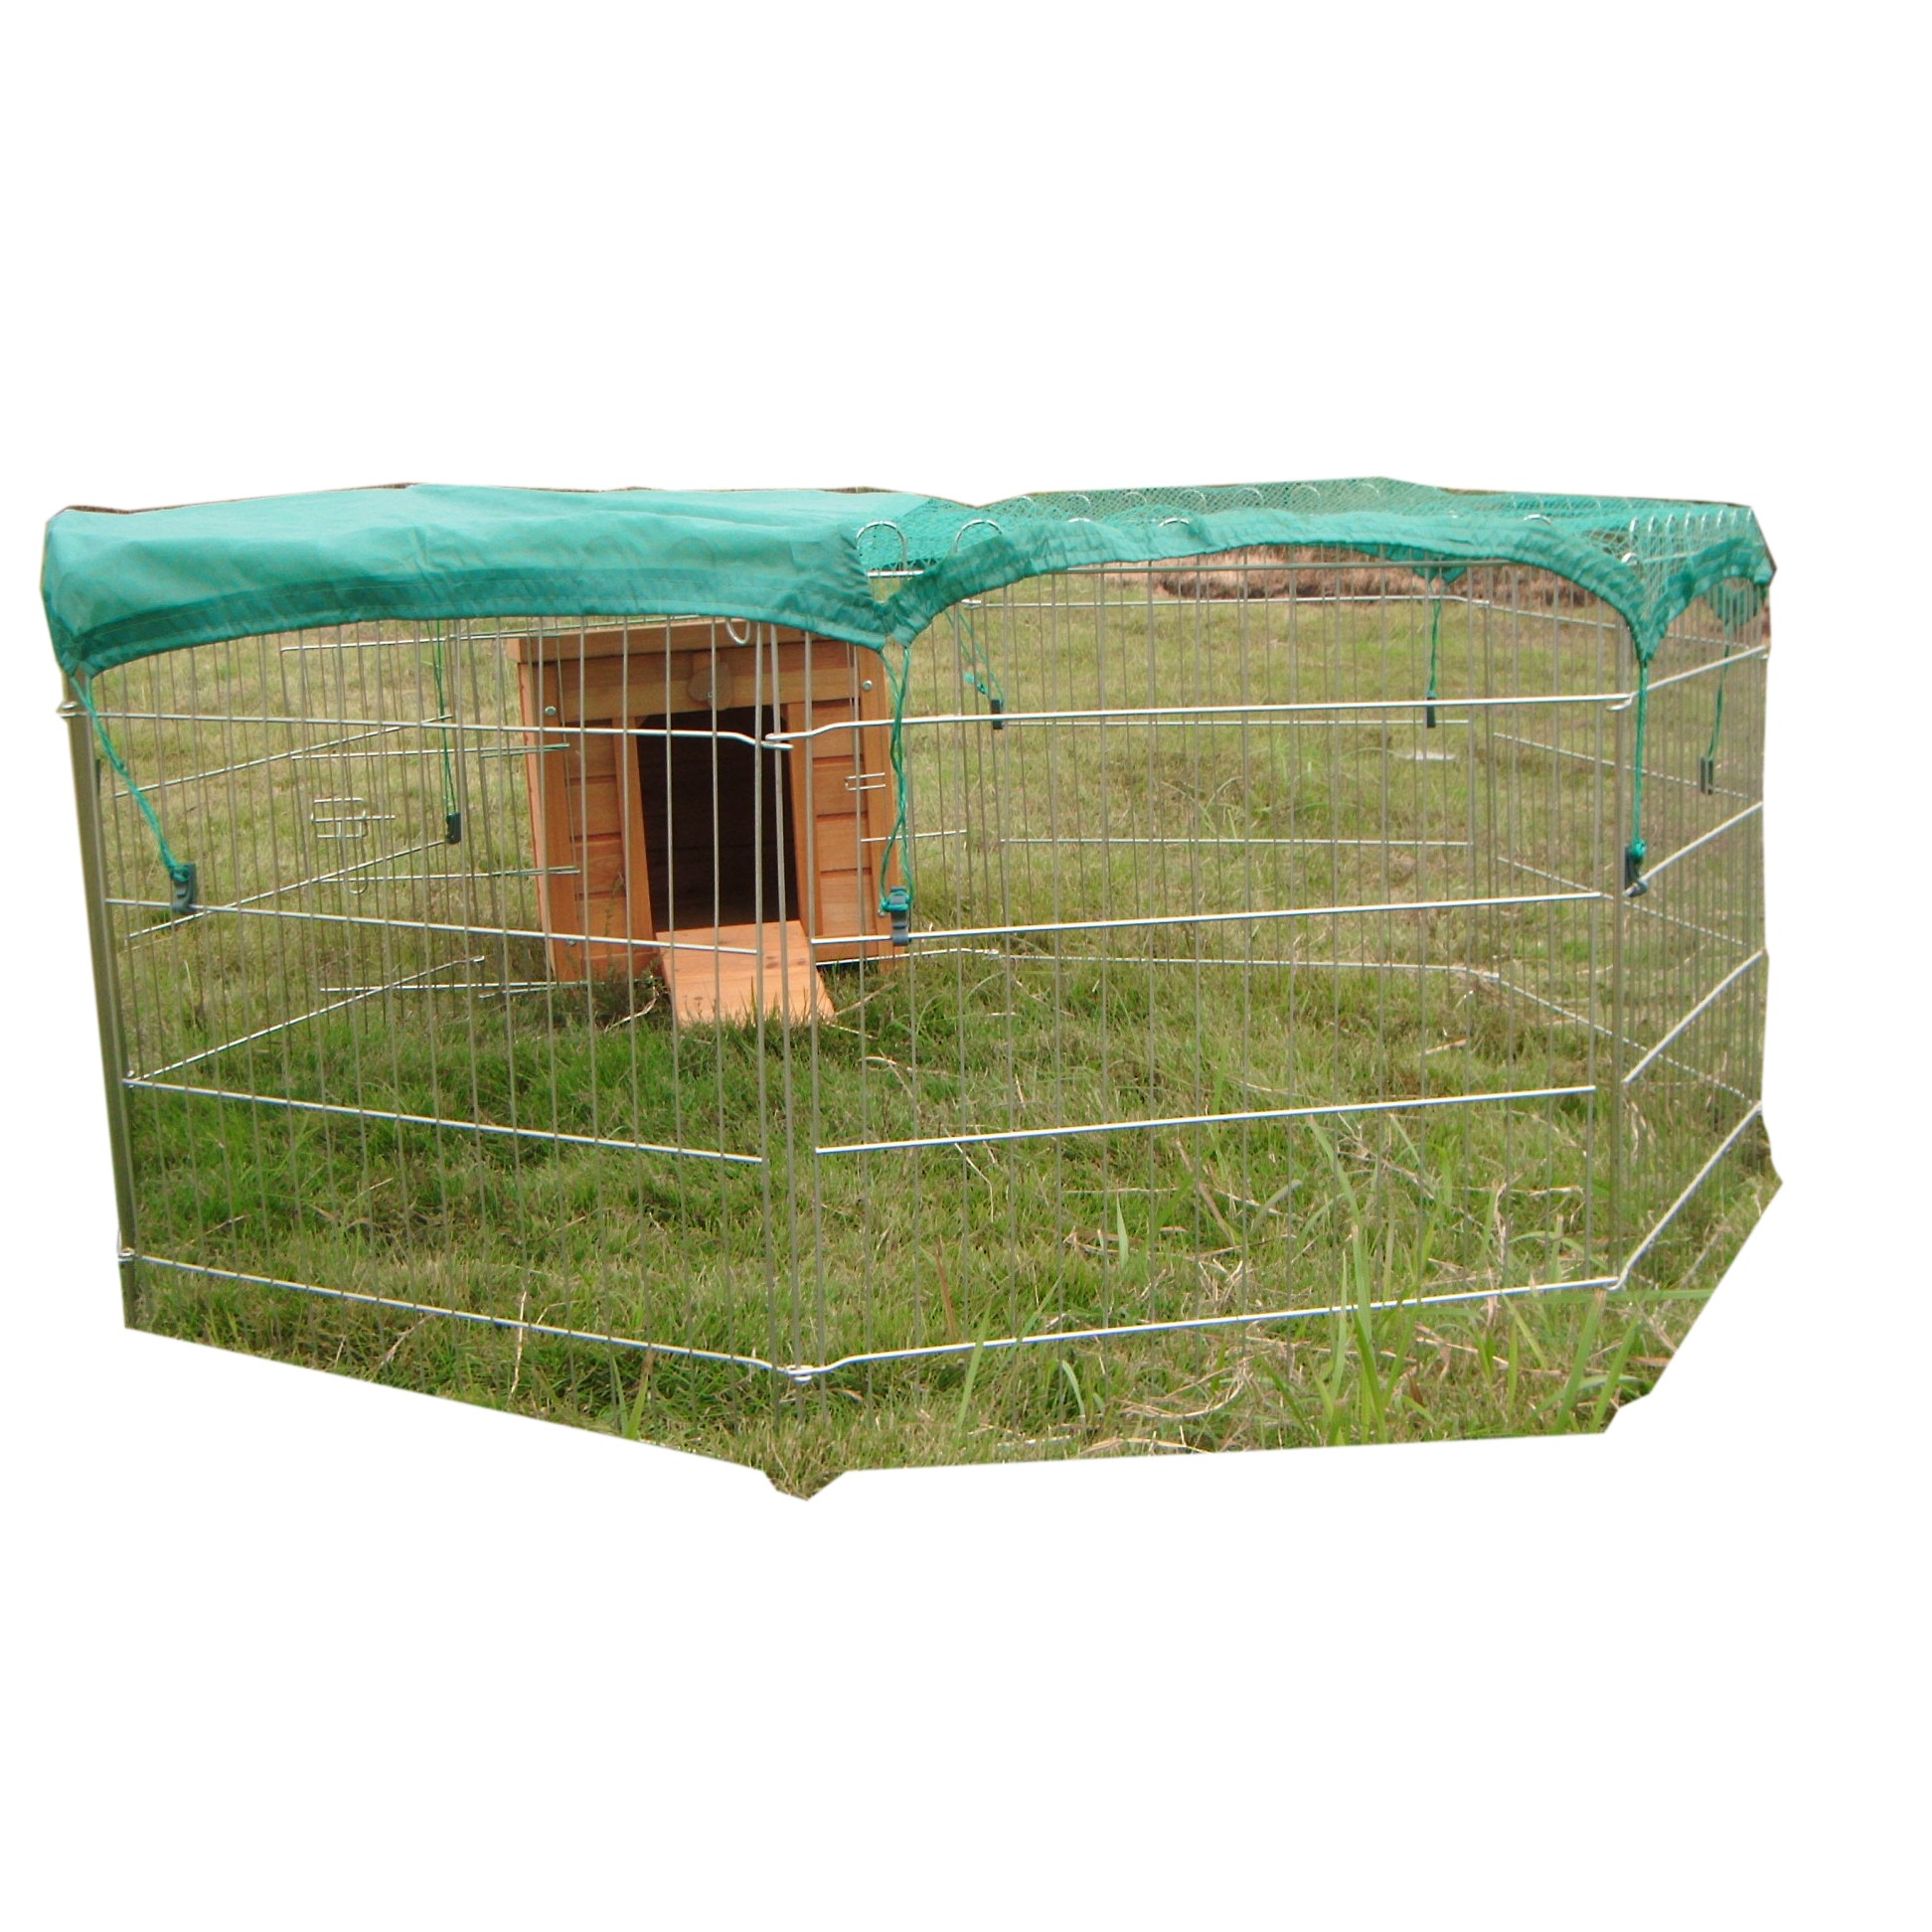 Well-designed Bird Cage Flat Pack -
 1 x small hide house + 1 x Large Outdoor Octagon 55-inch pet Playpen Enclosure for Rabbit Puppy hutch wire animal Run Cages – Easy